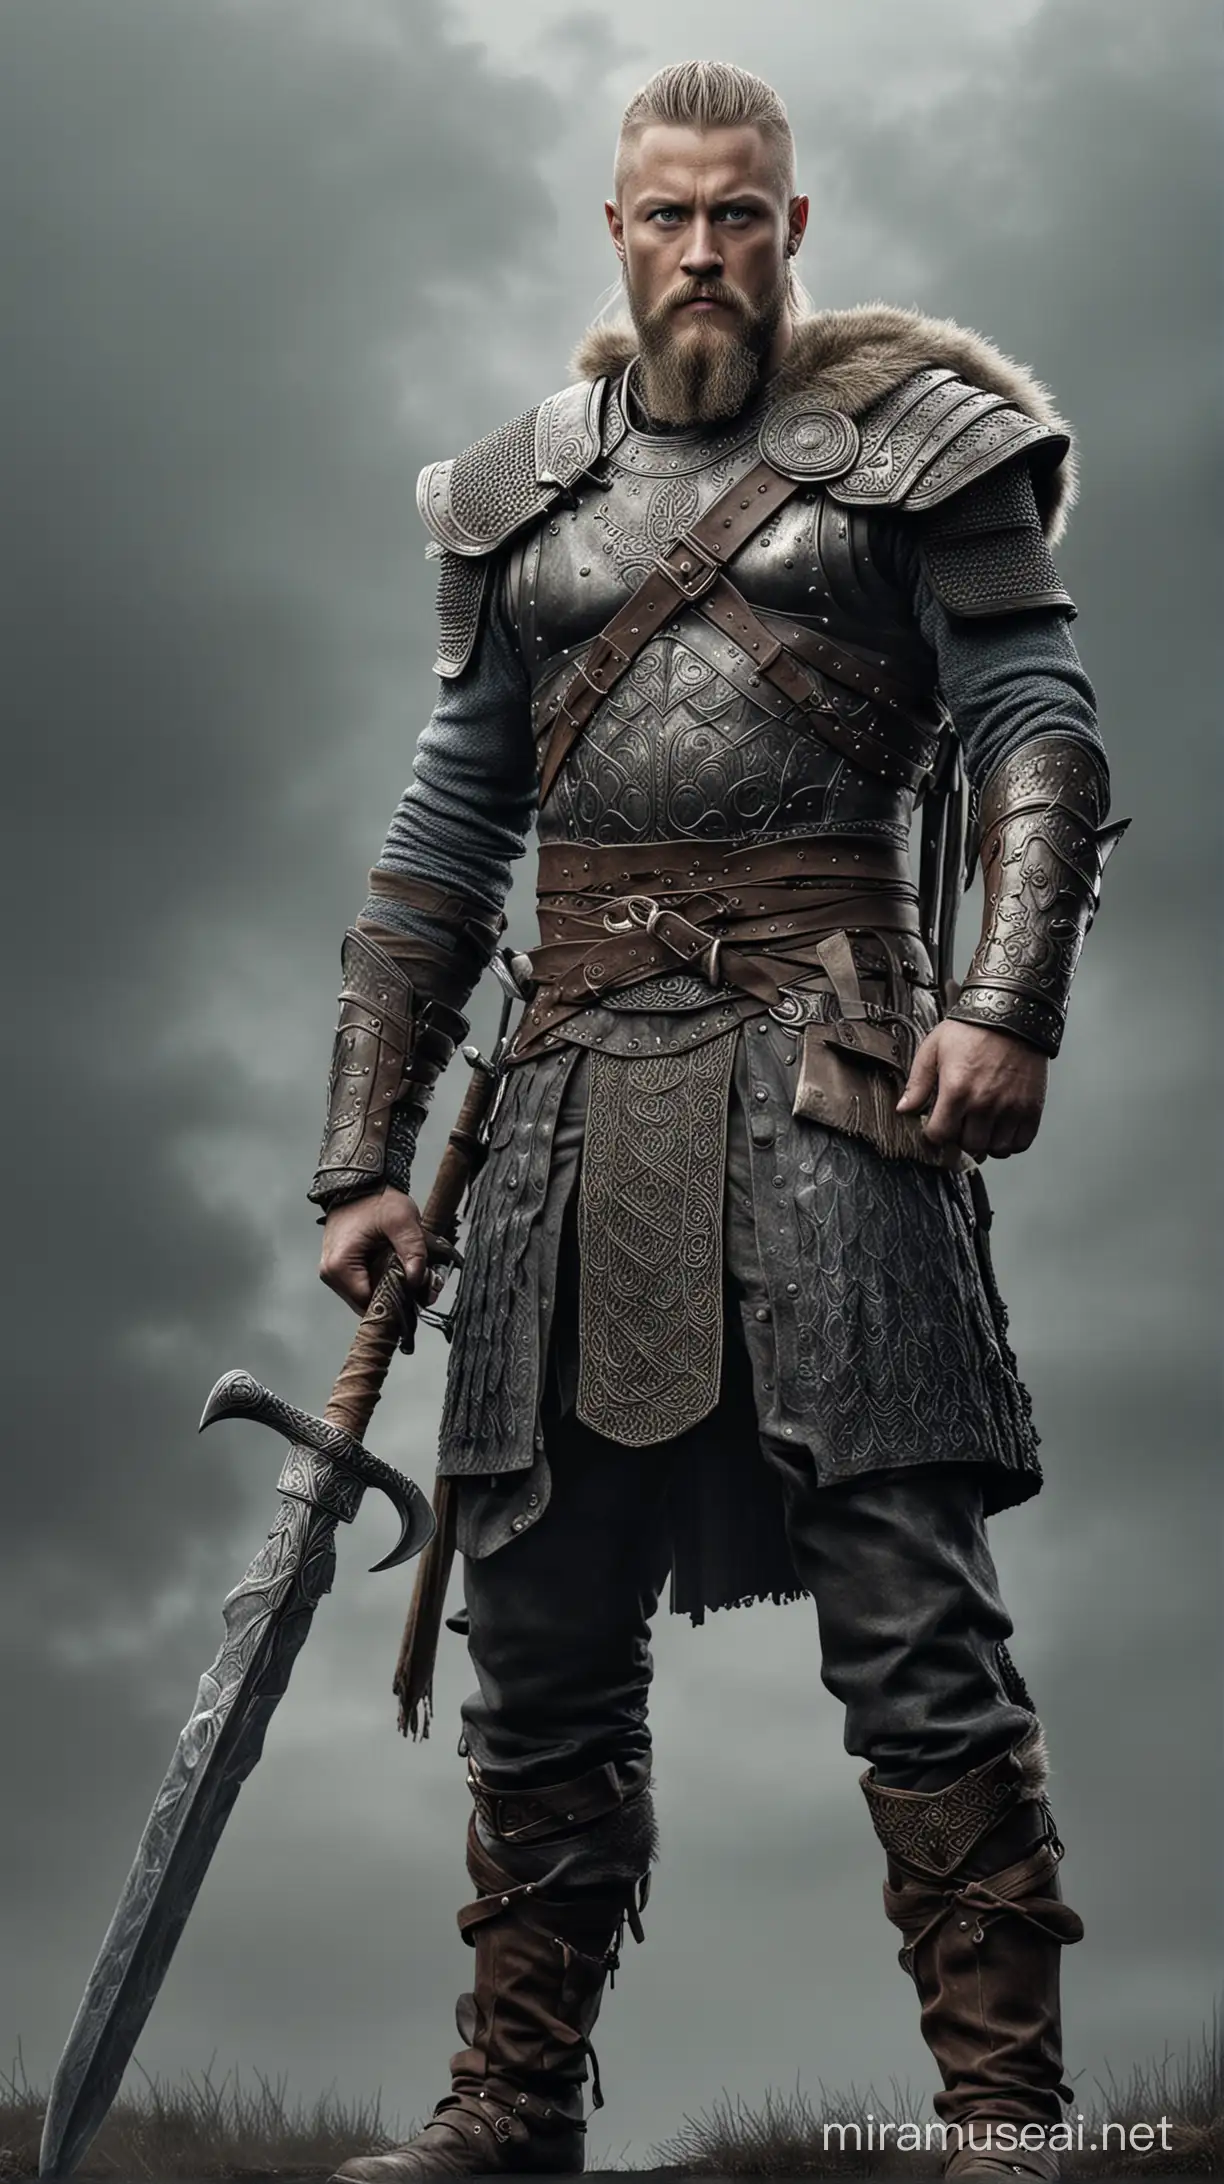 Ragnar Lothbrok standing tall as a legendary Norse warrior, clad in armor and wielding a mighty weapon. hyperrealistic